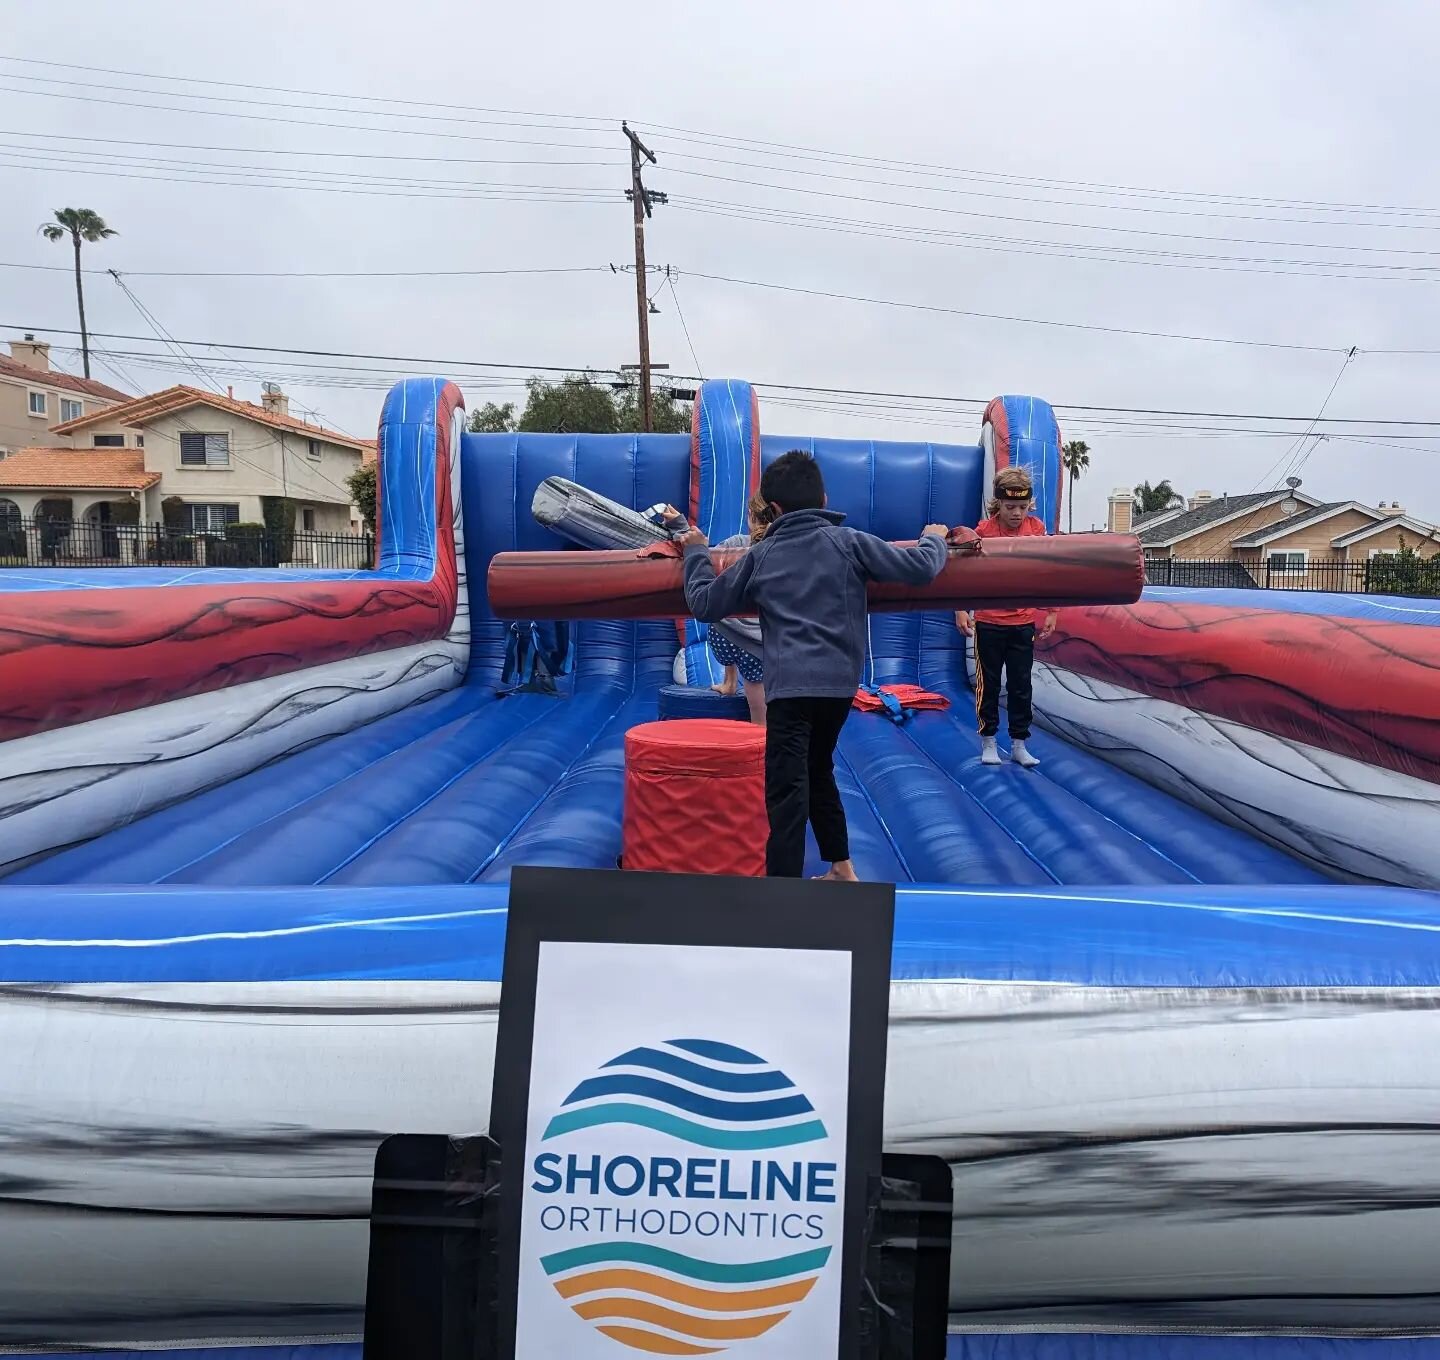 Thank you Shoreline Orthodontics Manhattan Beach for being a ride sponsor of the Jefferson Spring Carnival ❤️